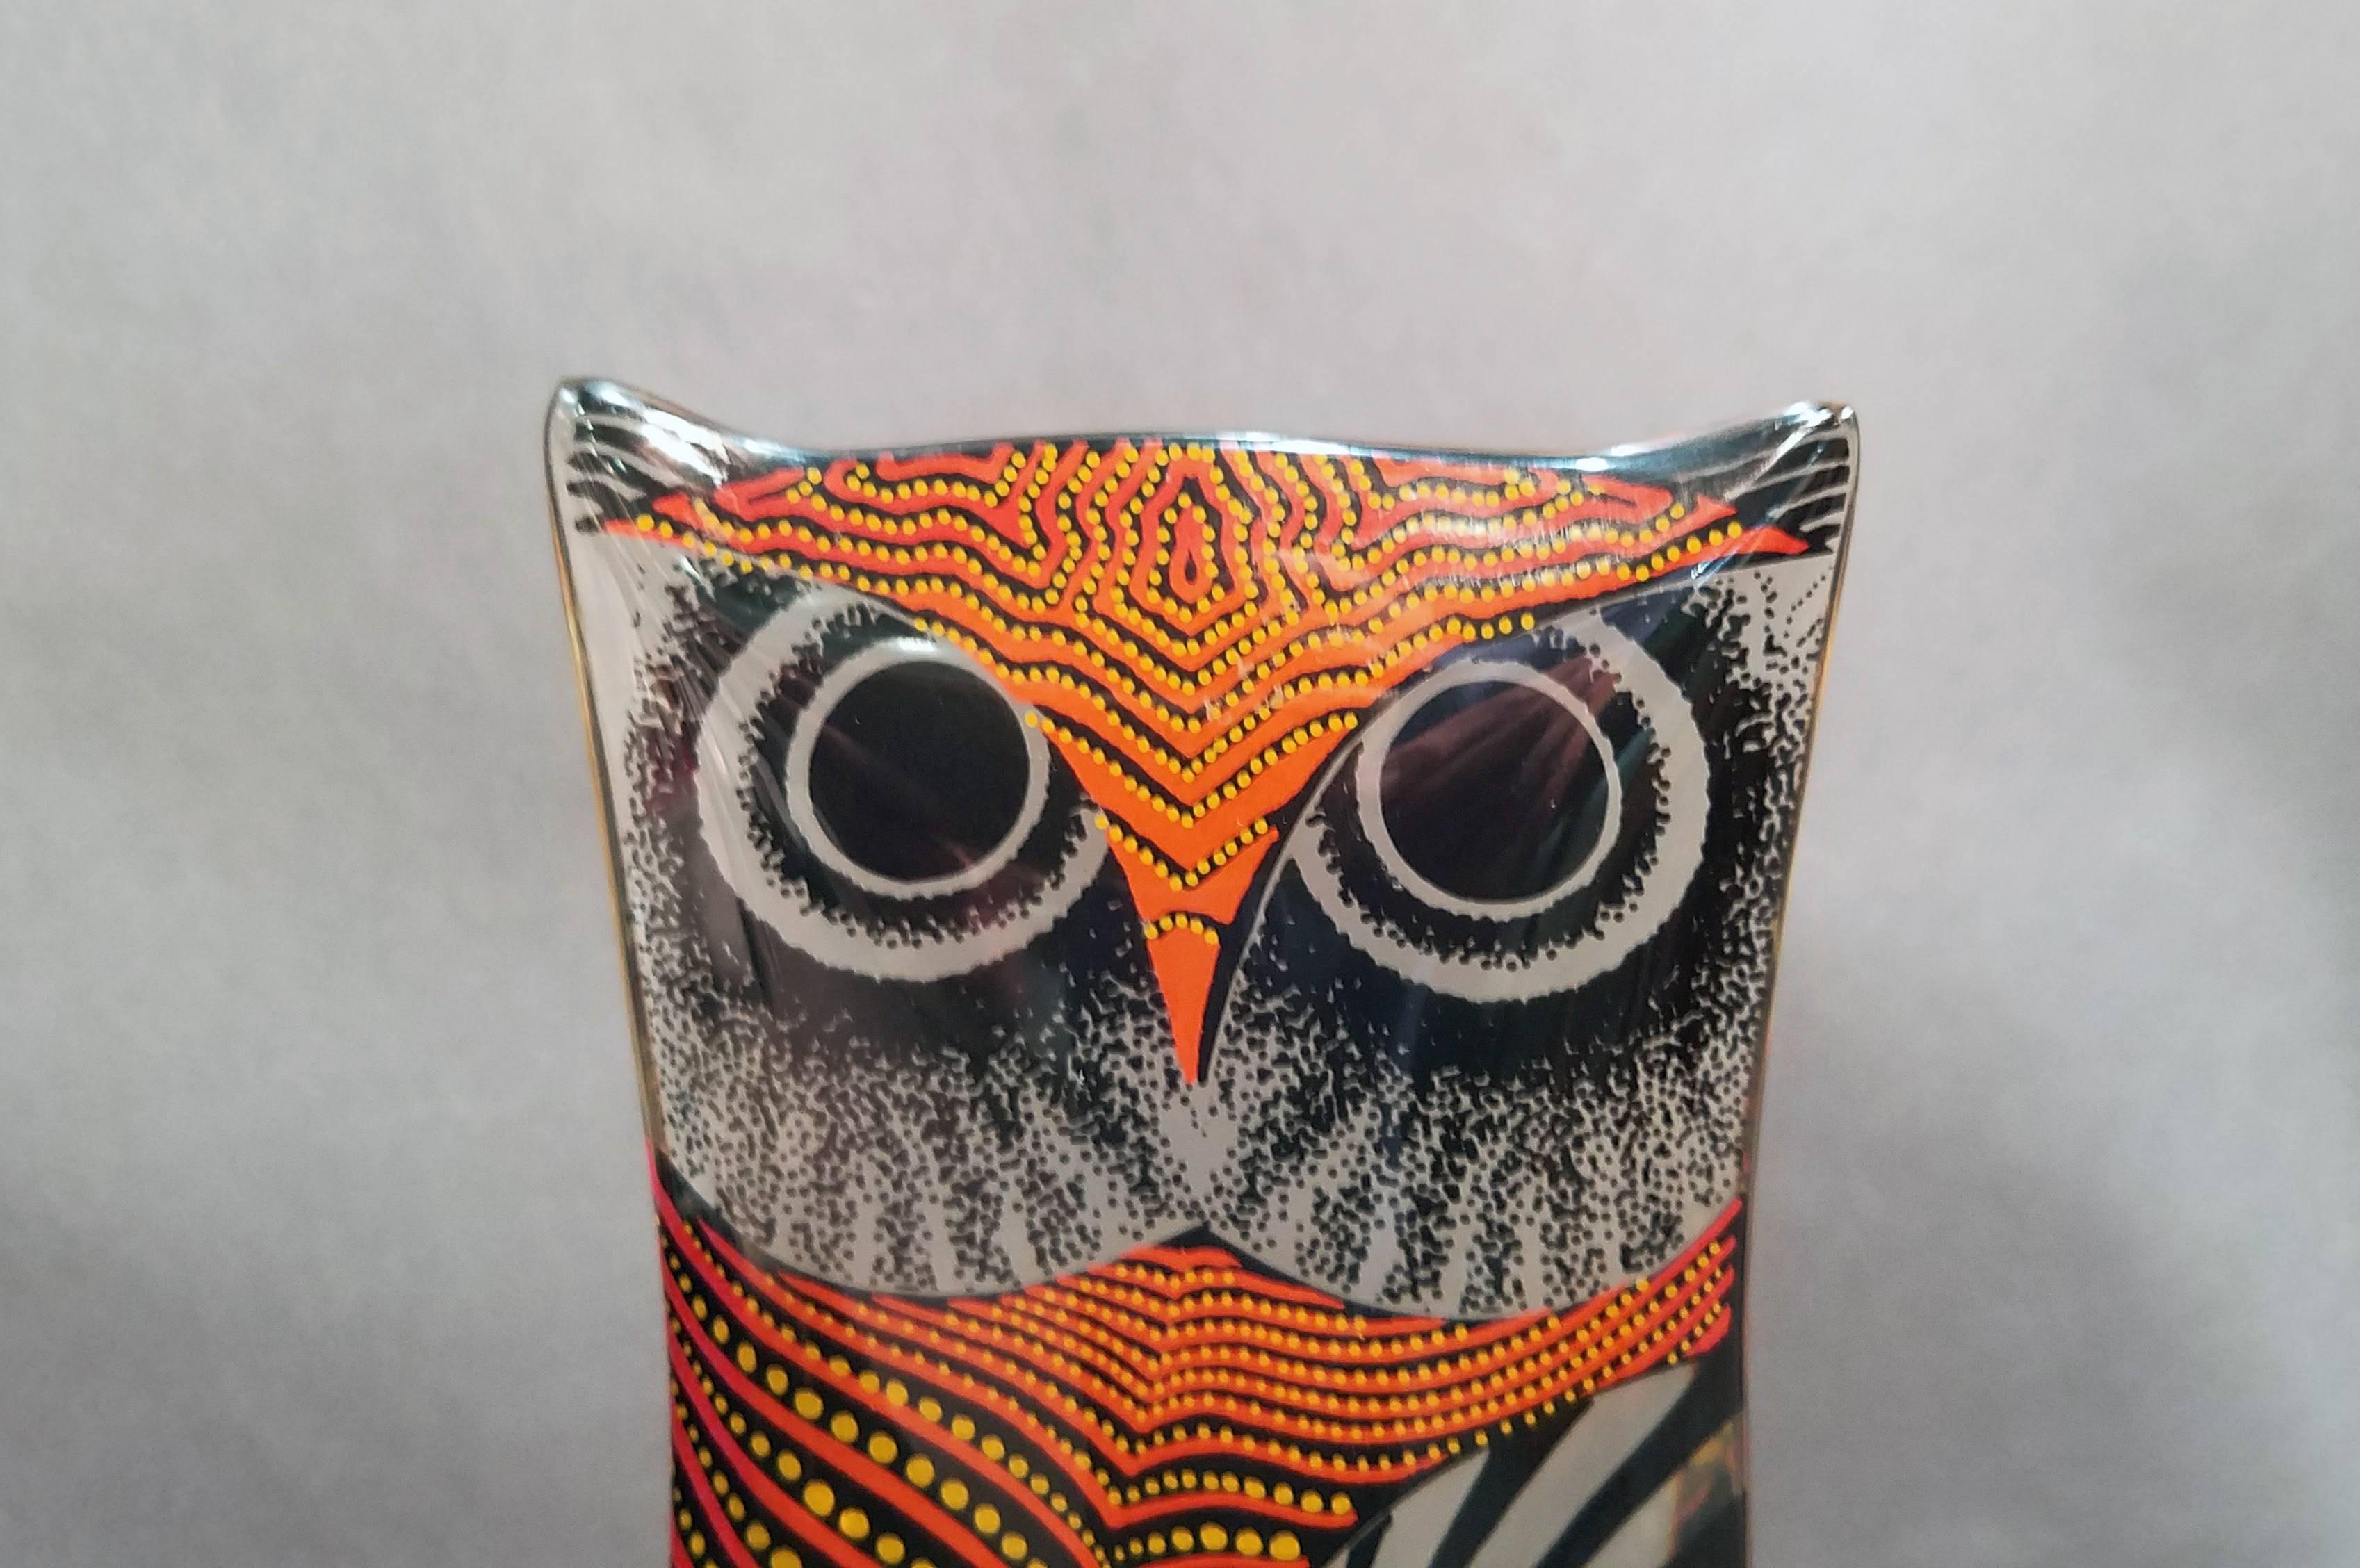 Abraham Palatnik two-tone Lucite Owl, 
1970s.

The large two-tone Abraham Palatnik double-sided owl. One side in brown, yellow and black and the other side in black.

Dimensions: 10 inches x 4 inches wide x 2 inches deep at foot.

The